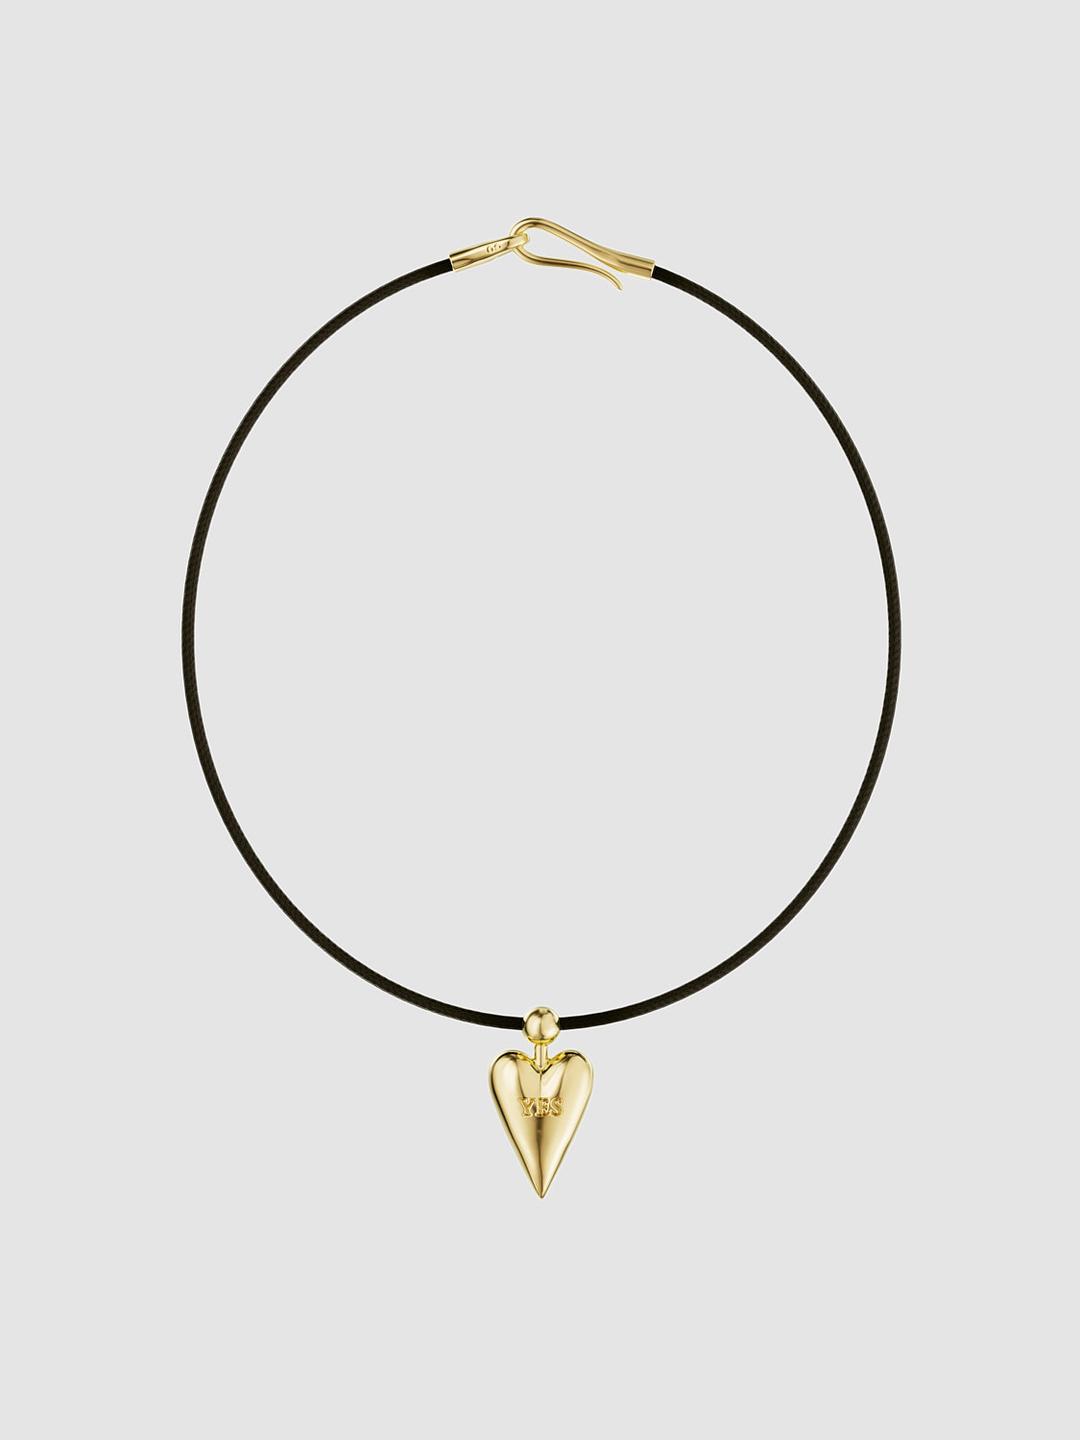 Yes-No Flip Necklace Gold Plated